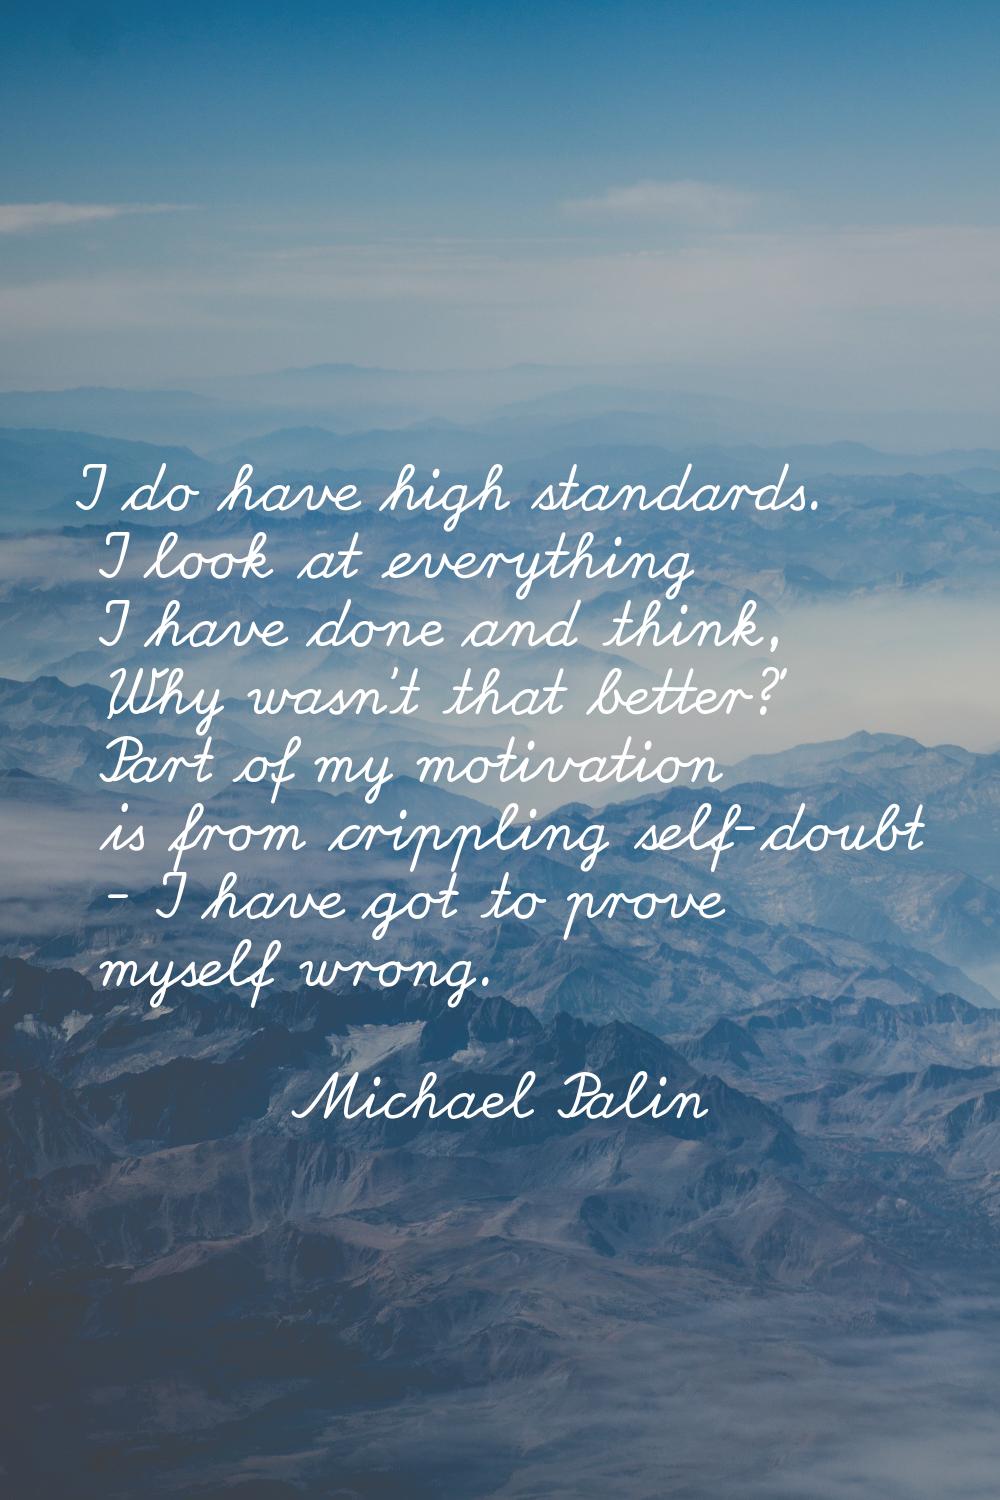 I do have high standards. I look at everything I have done and think, 'Why wasn't that better?' Par